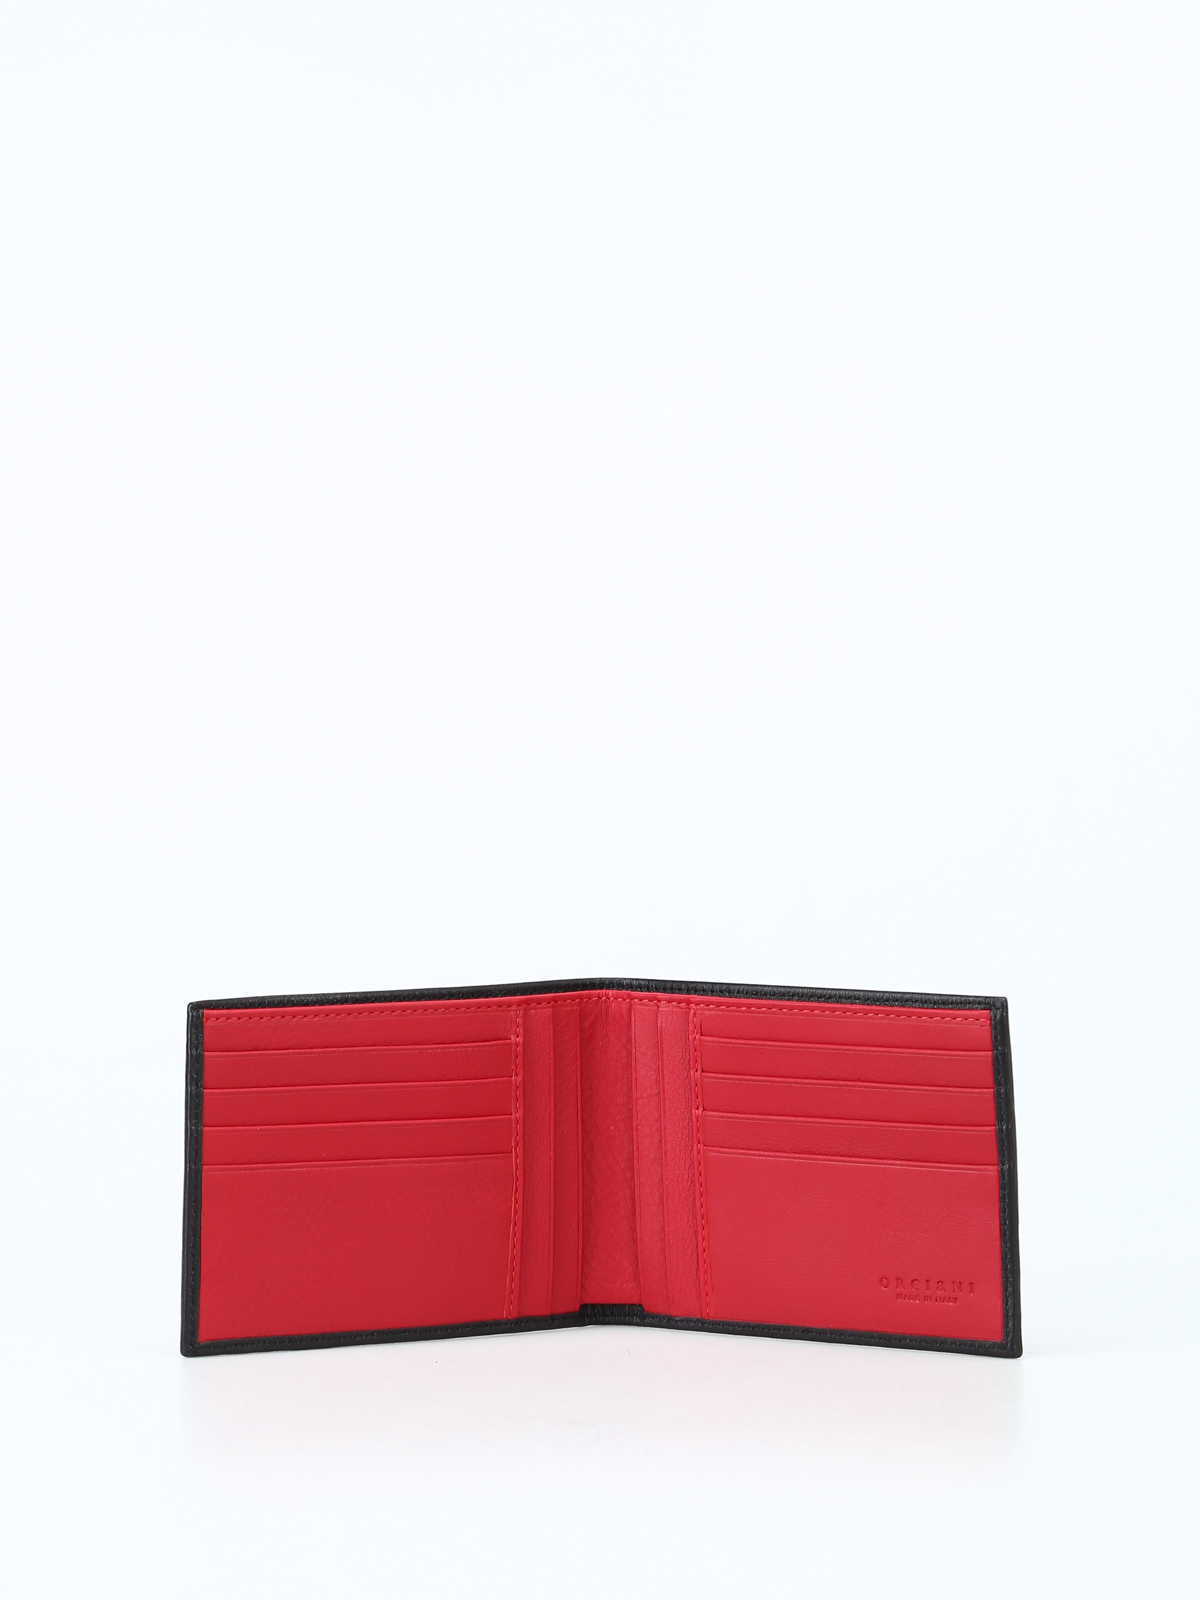 Black and red wallet